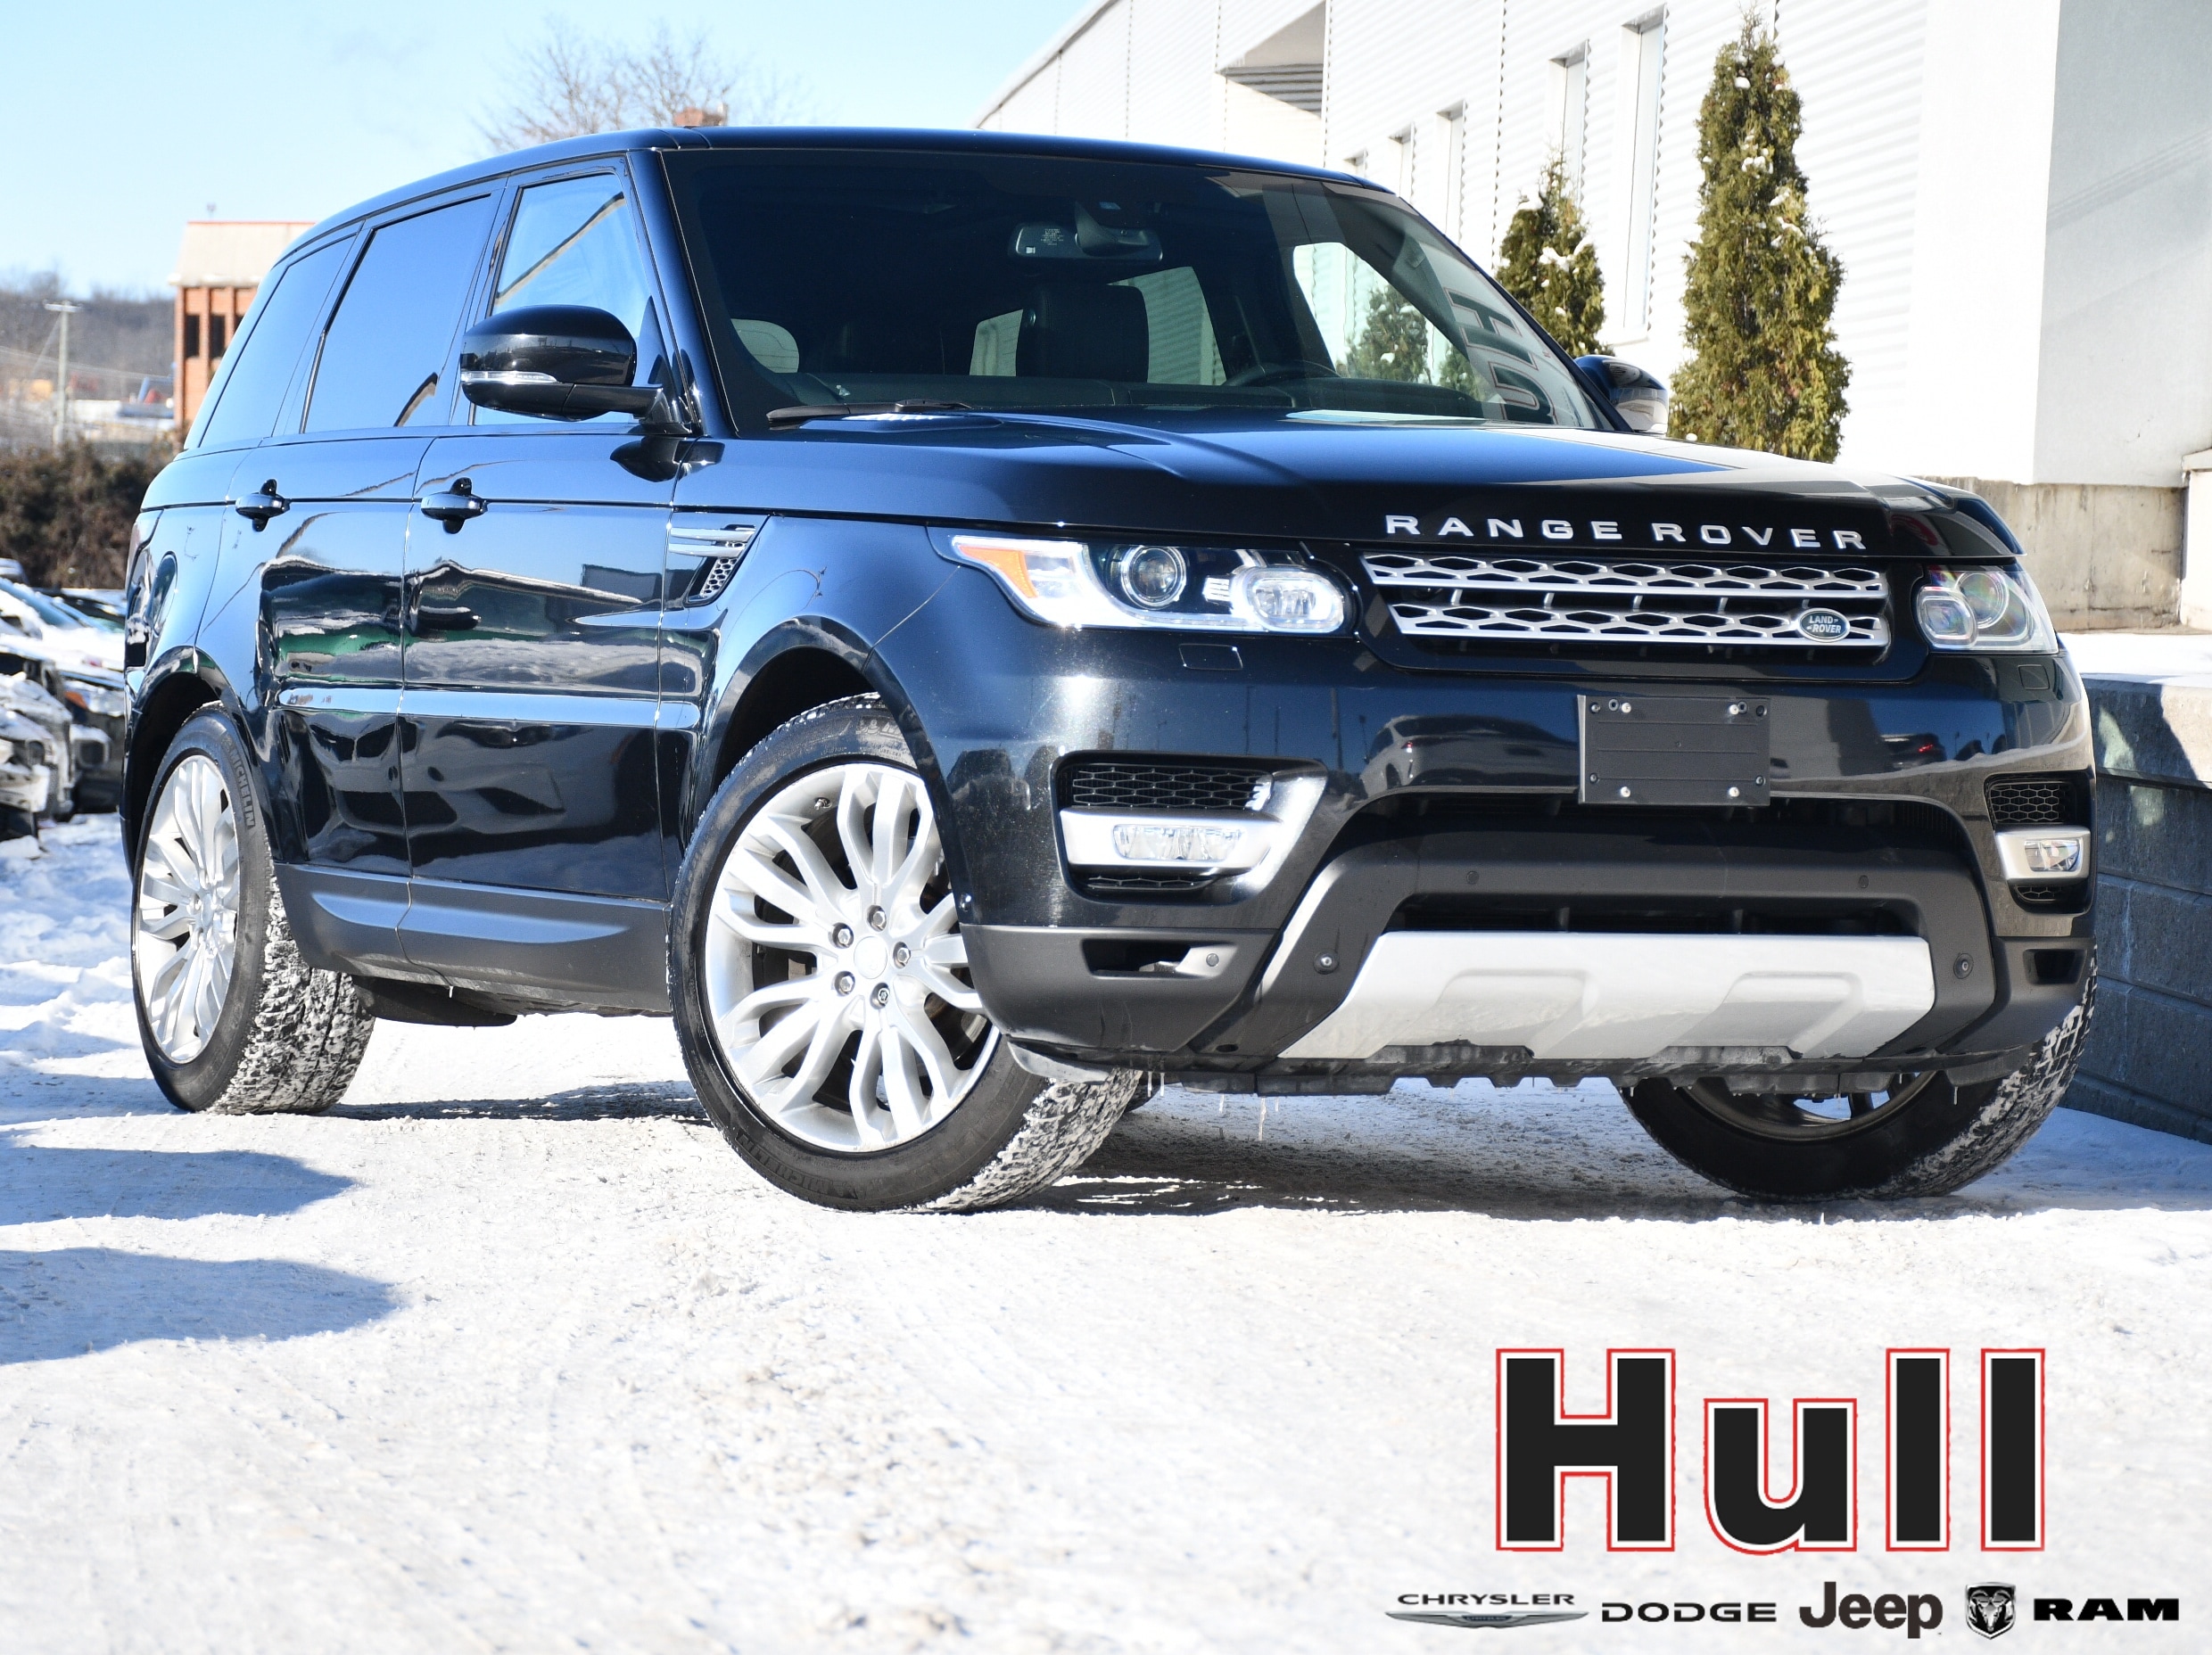 Land Rover Range Rover Sport 2015 HSE - Merdian Sound System Pano Roof Heated F